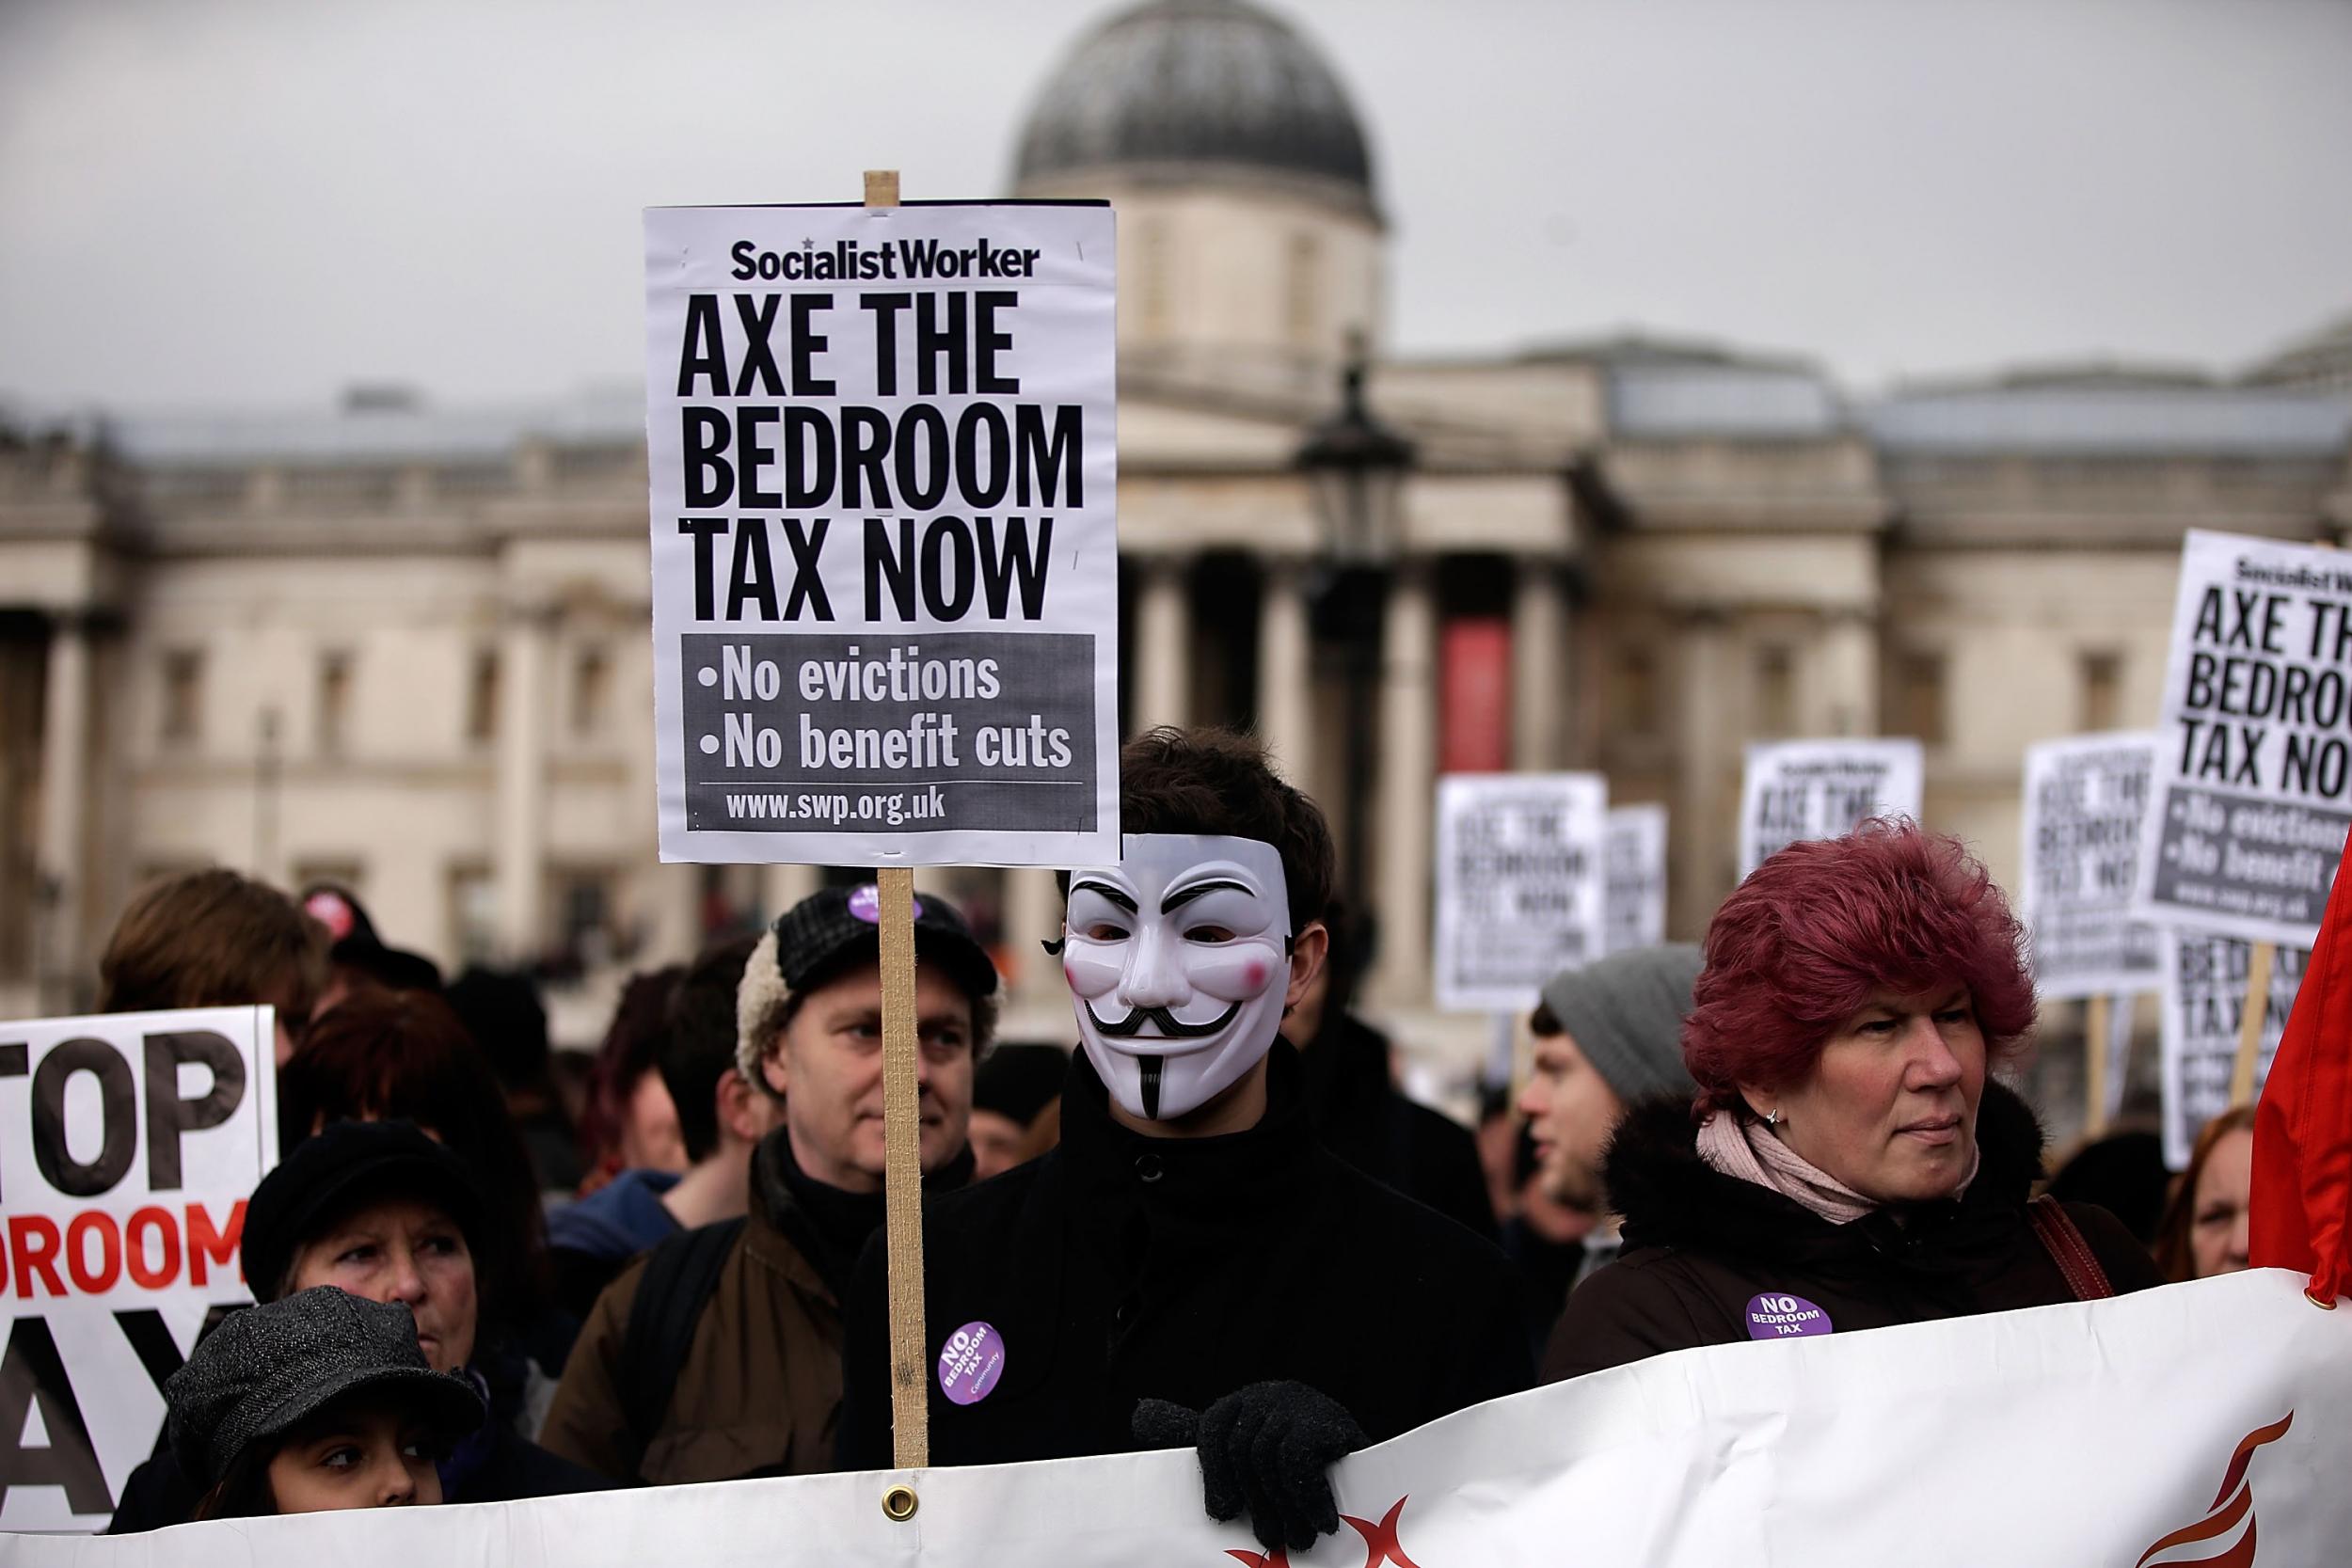 Protesters demonstrate against the bedroom tax in Trafalgar Square